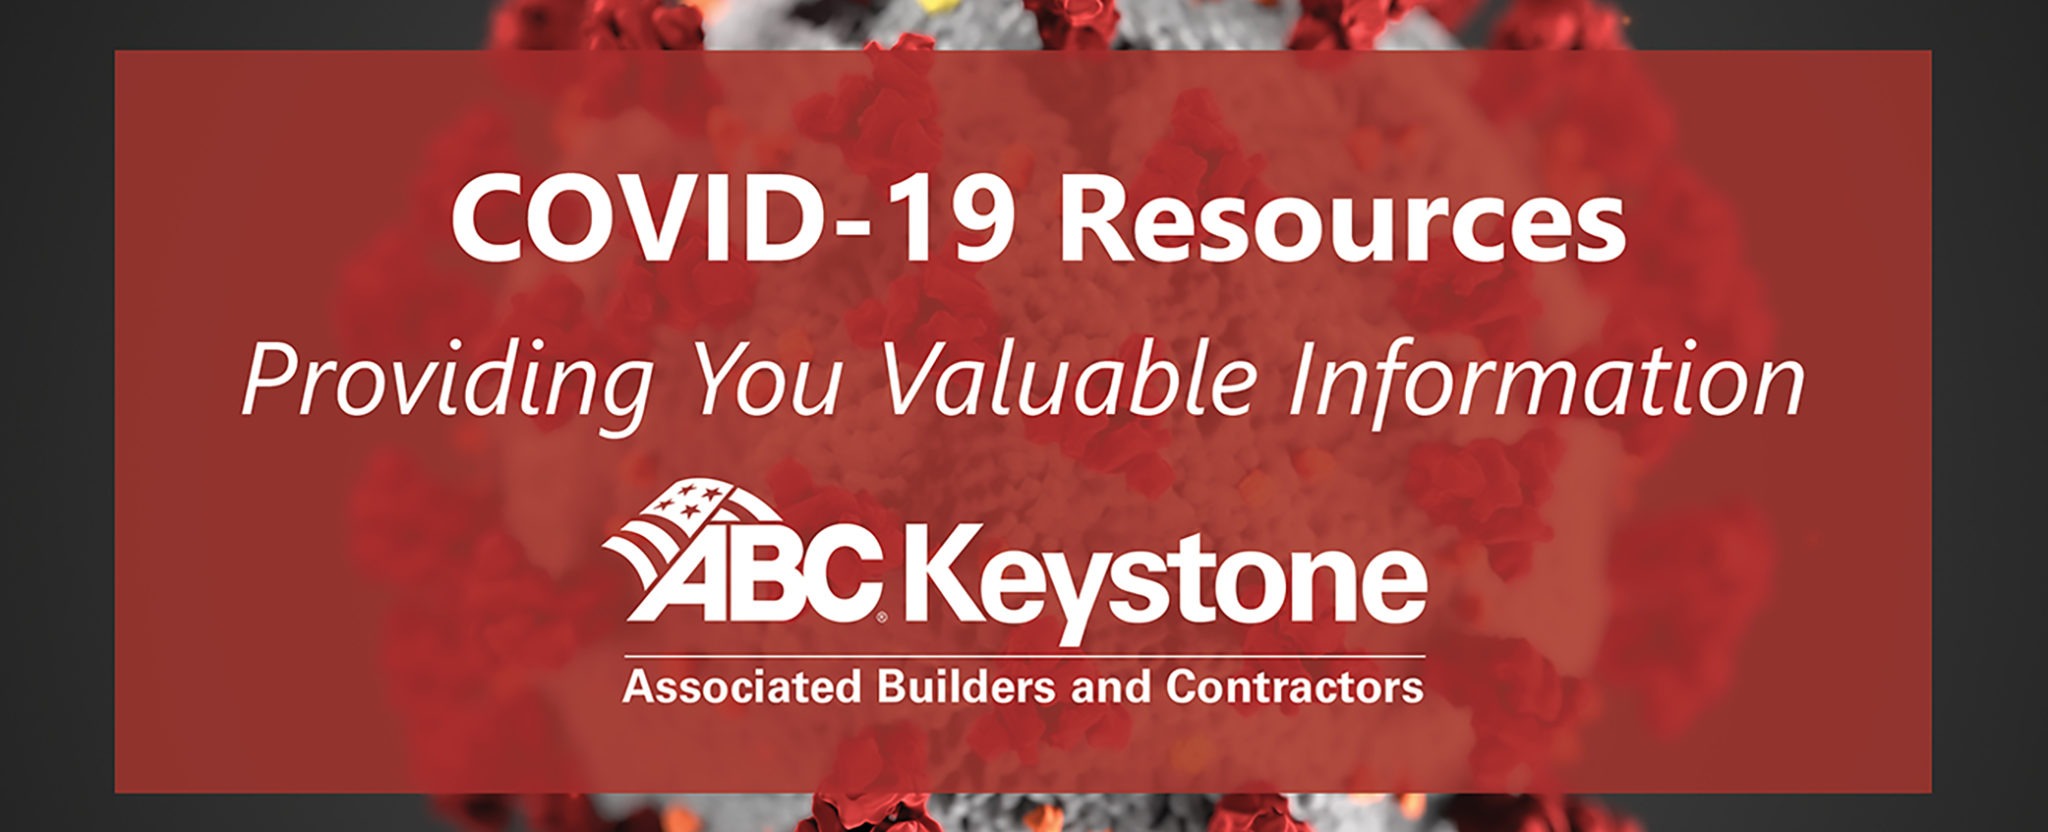 COVID-19-Header-Resources-Blog-ABC-Keystone-Graphic-scaled